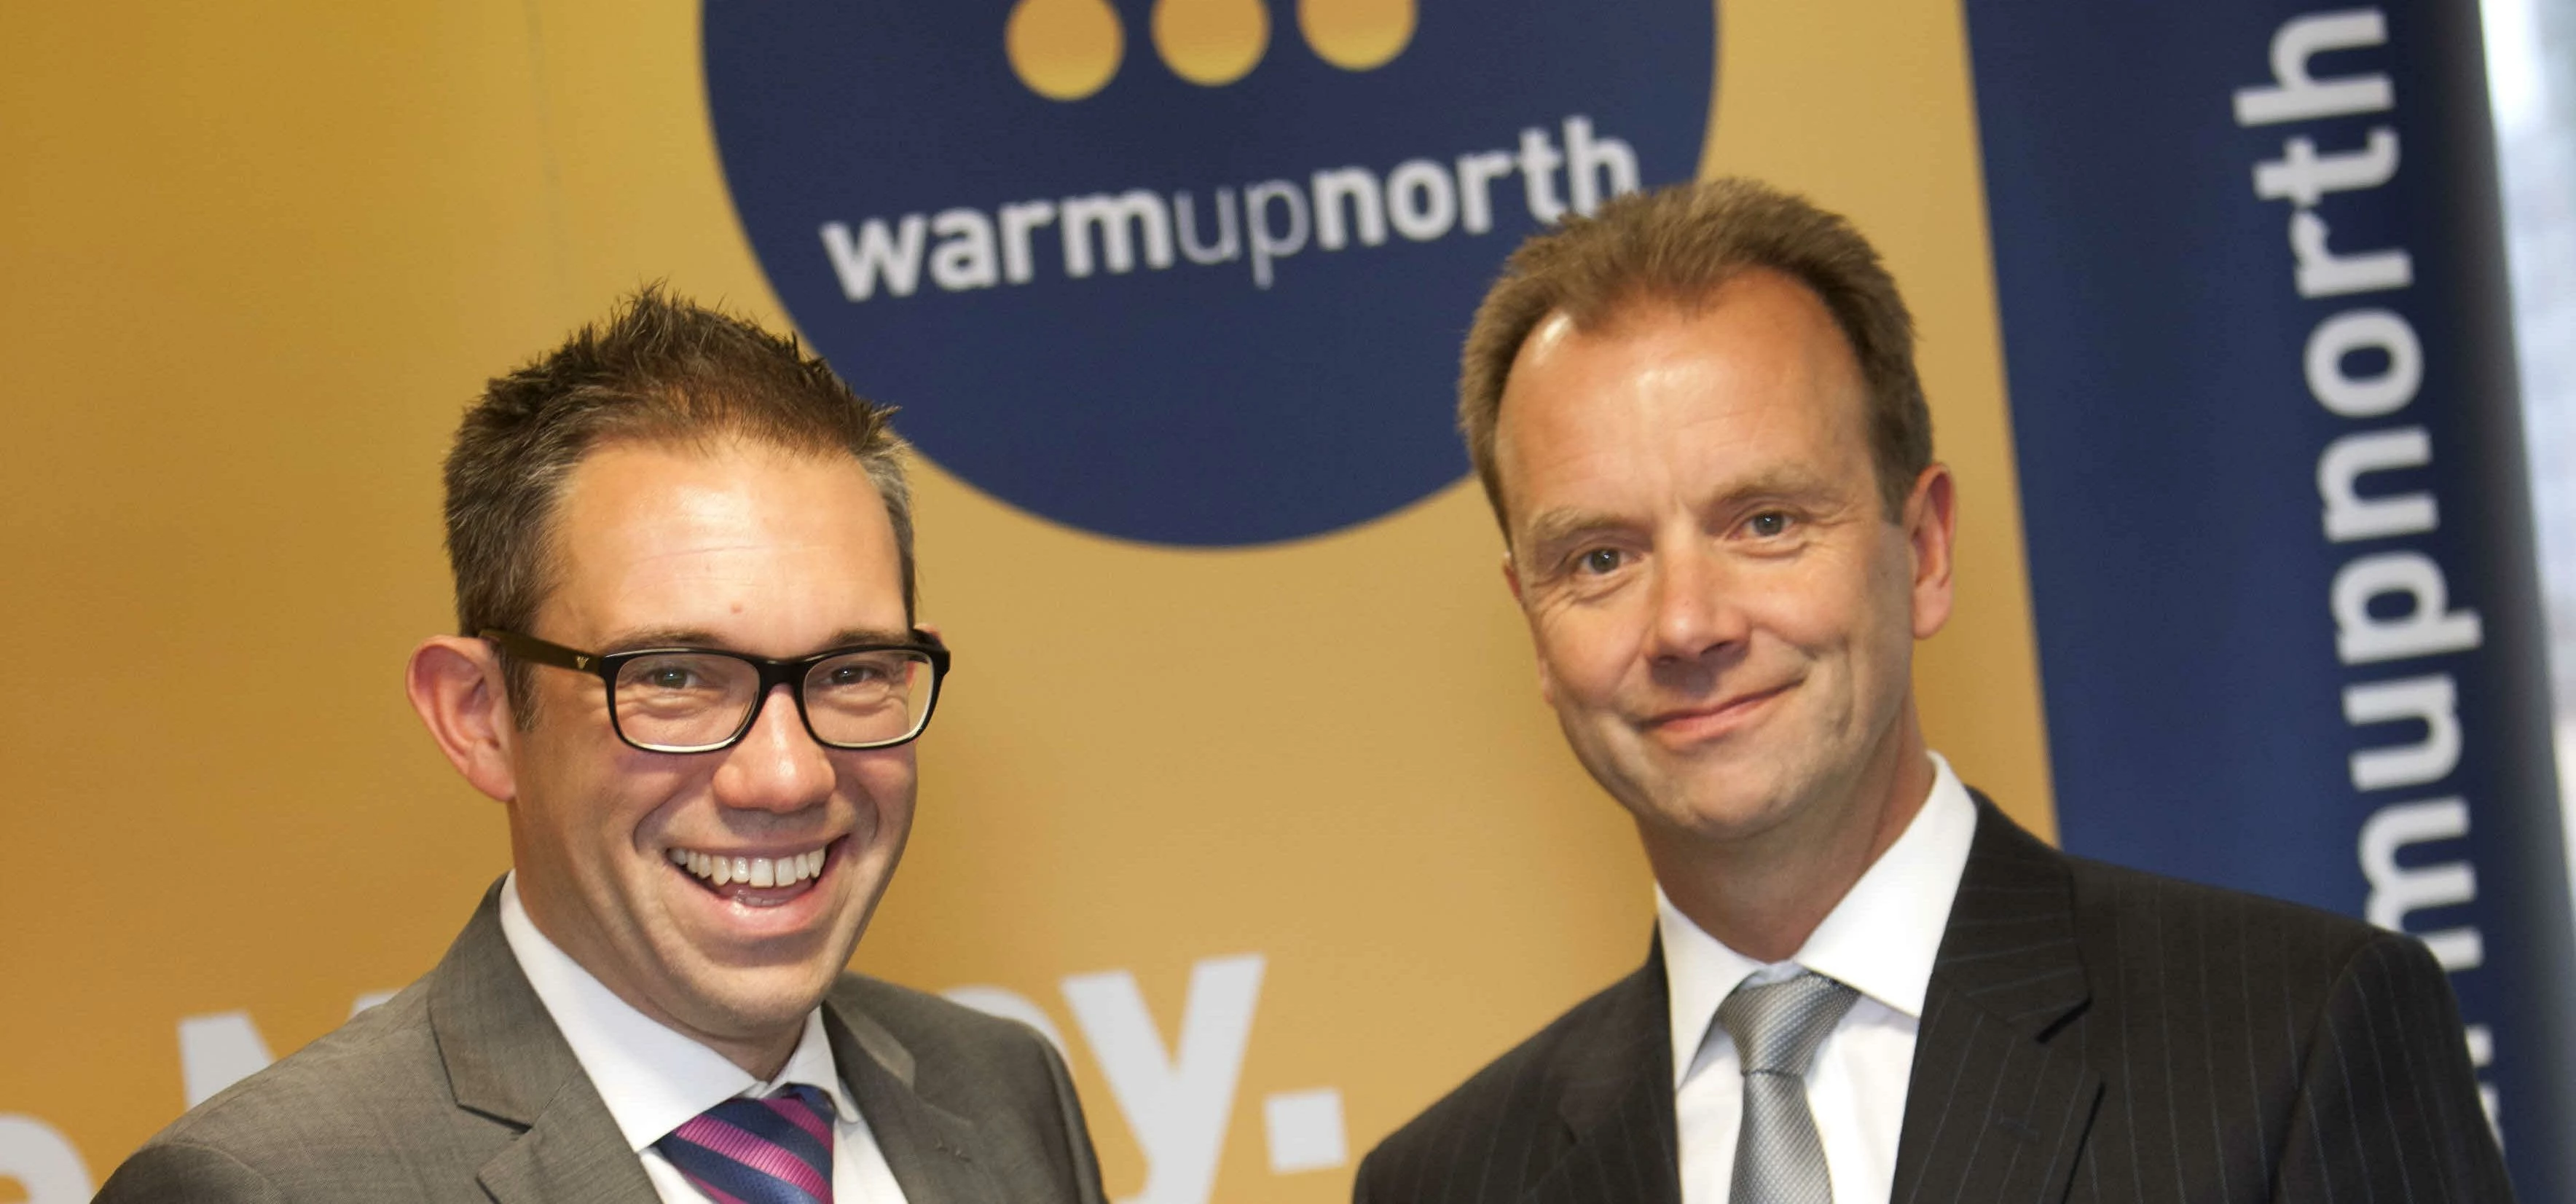 Warm Up North’s head of commercial Jon Kershaw (left) with Stuart Margerrison (right), director of b